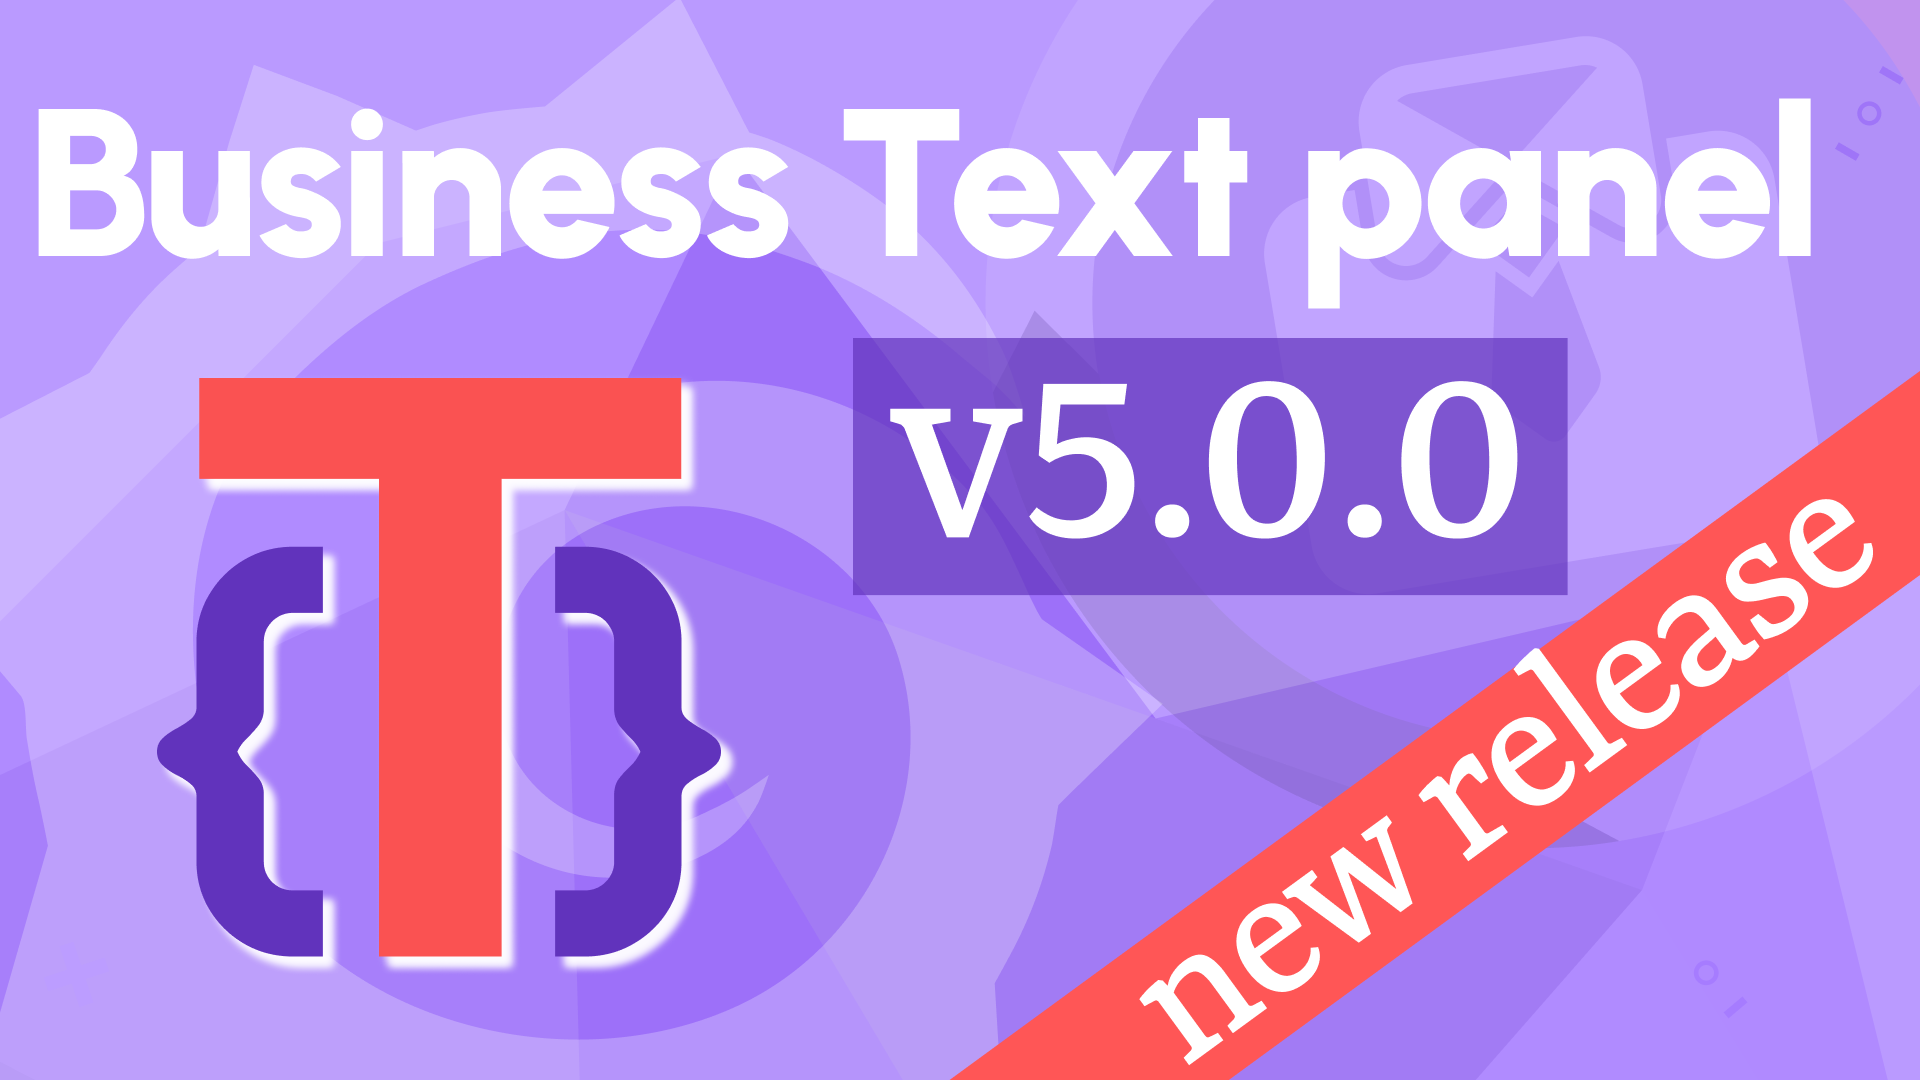 Business Text Panel 5.0.0